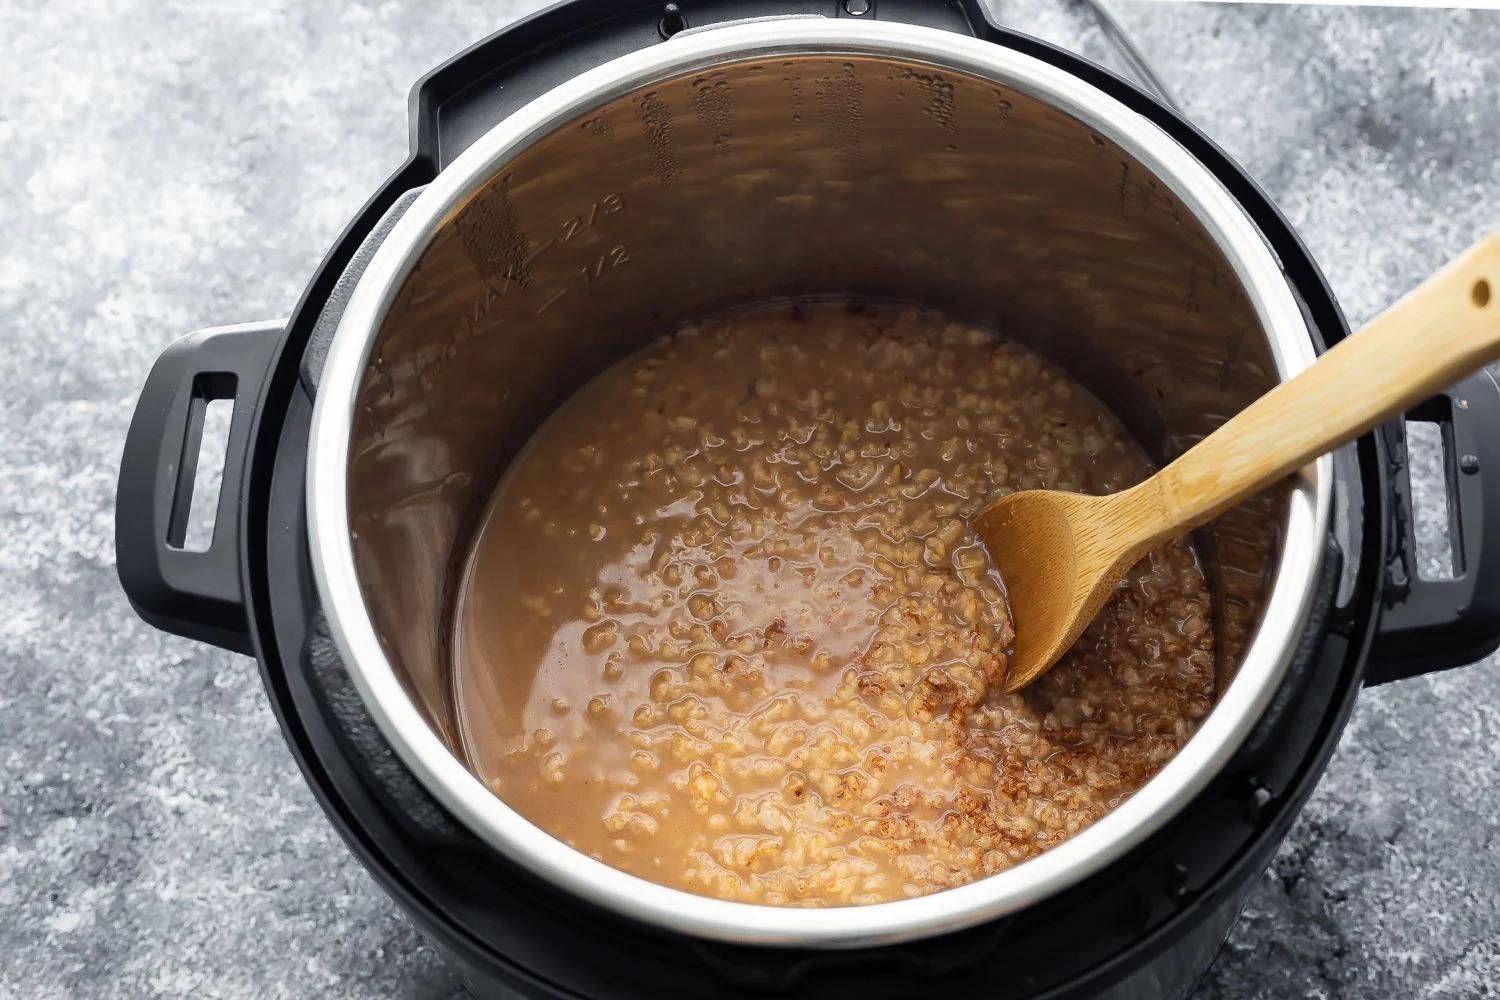 How To Make Oatmeal In An Electric Pressure Cooker